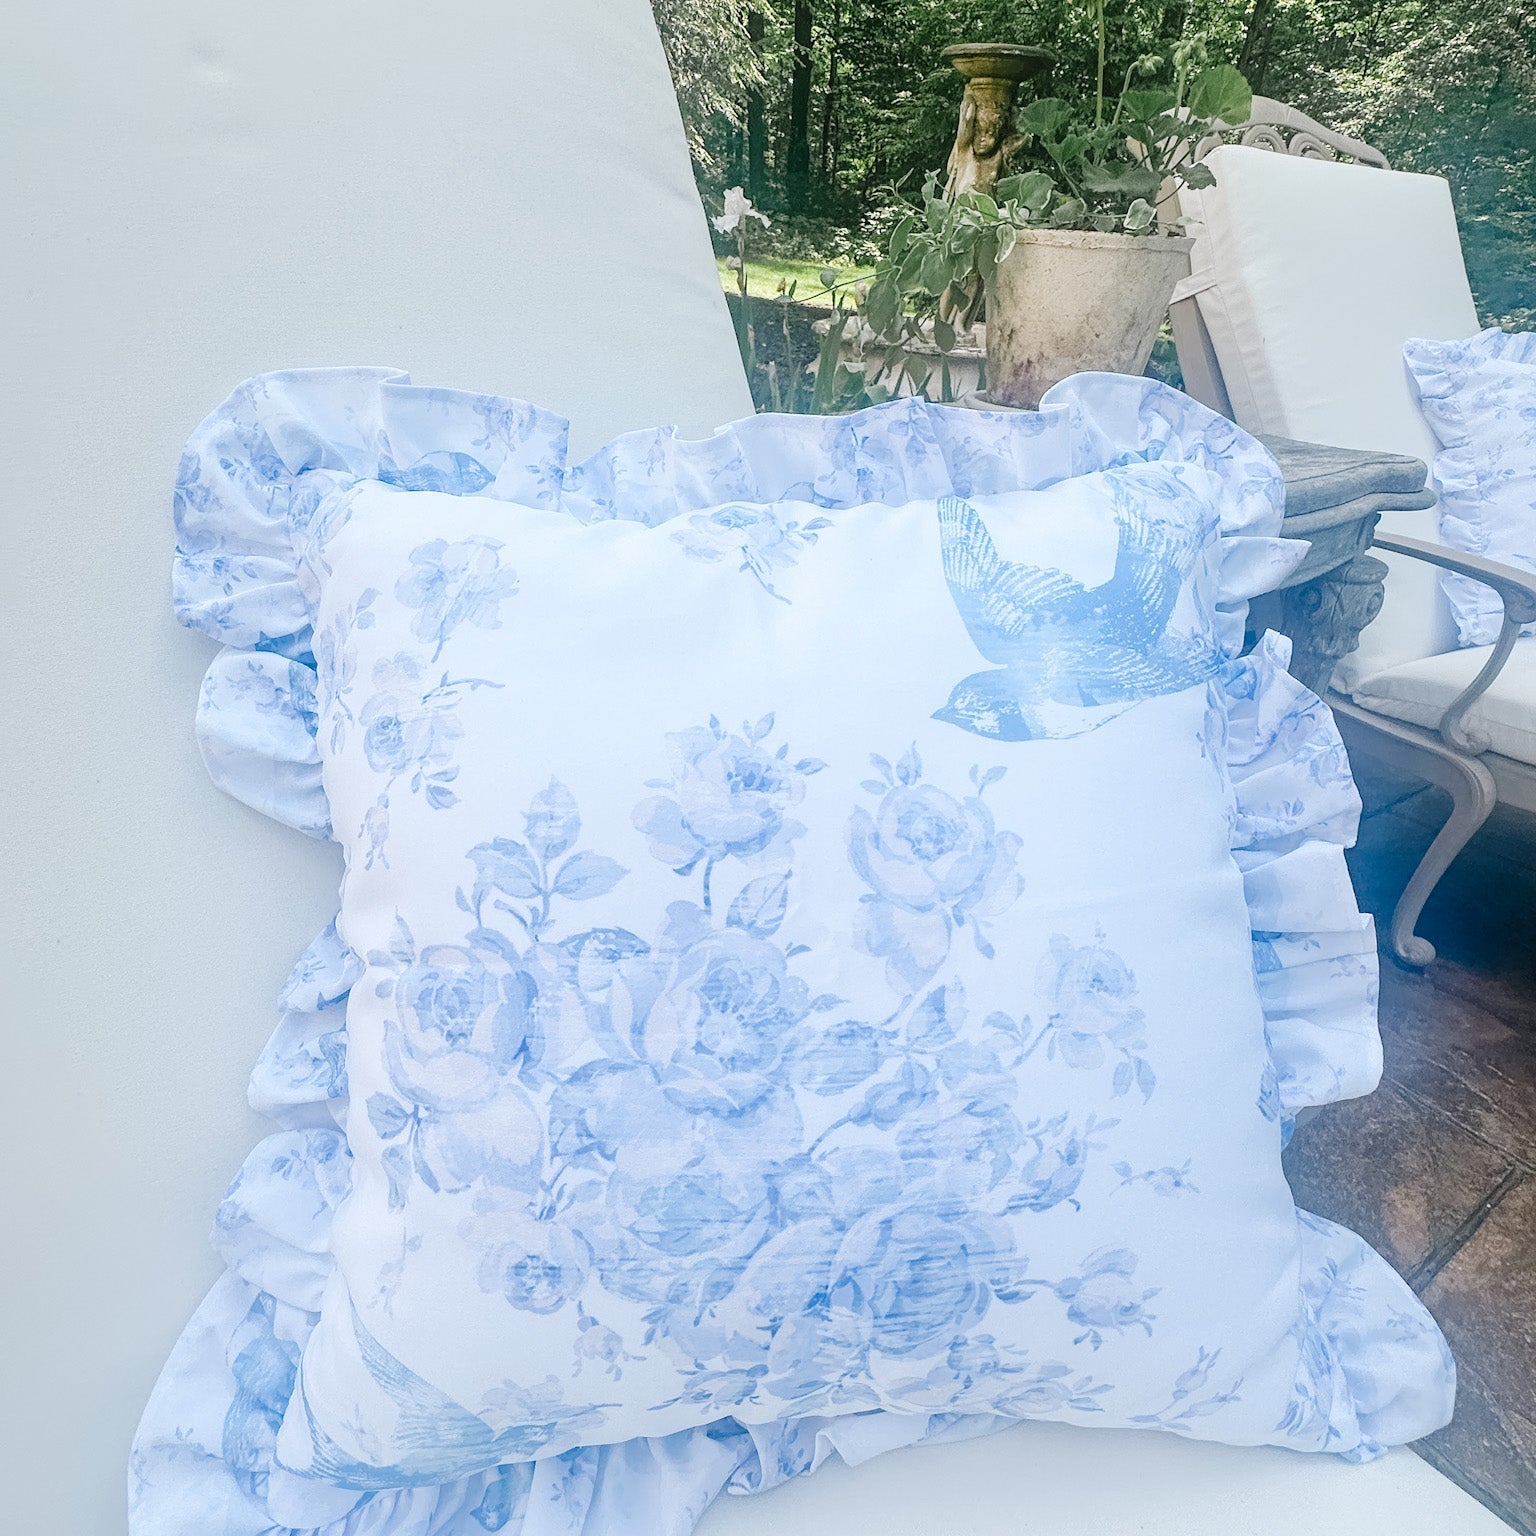 The 18" x 18" Outdoor Ruffled Bluebird Pillow Cover - Ivory Lane Home